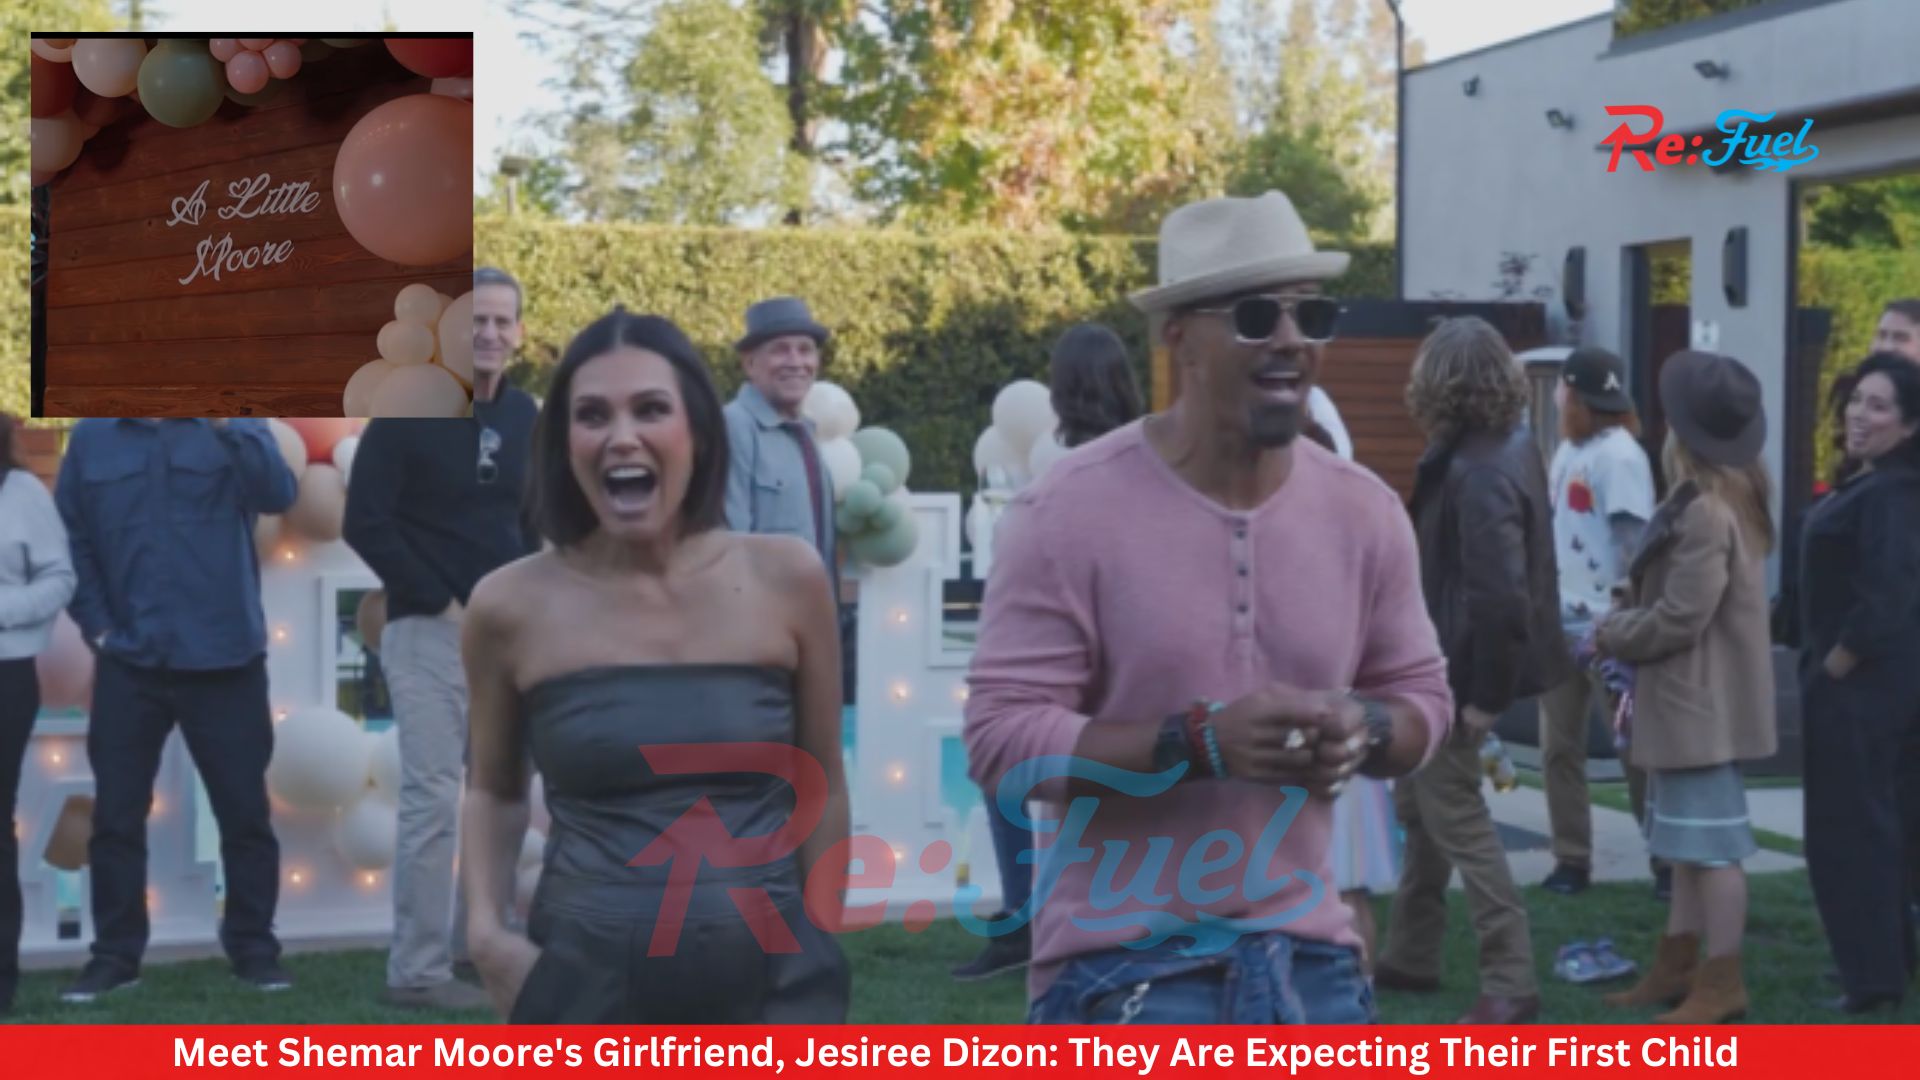 Meet Shemar Moore's Girlfriend, Jesiree Dizon: They Are Expecting Their First Child